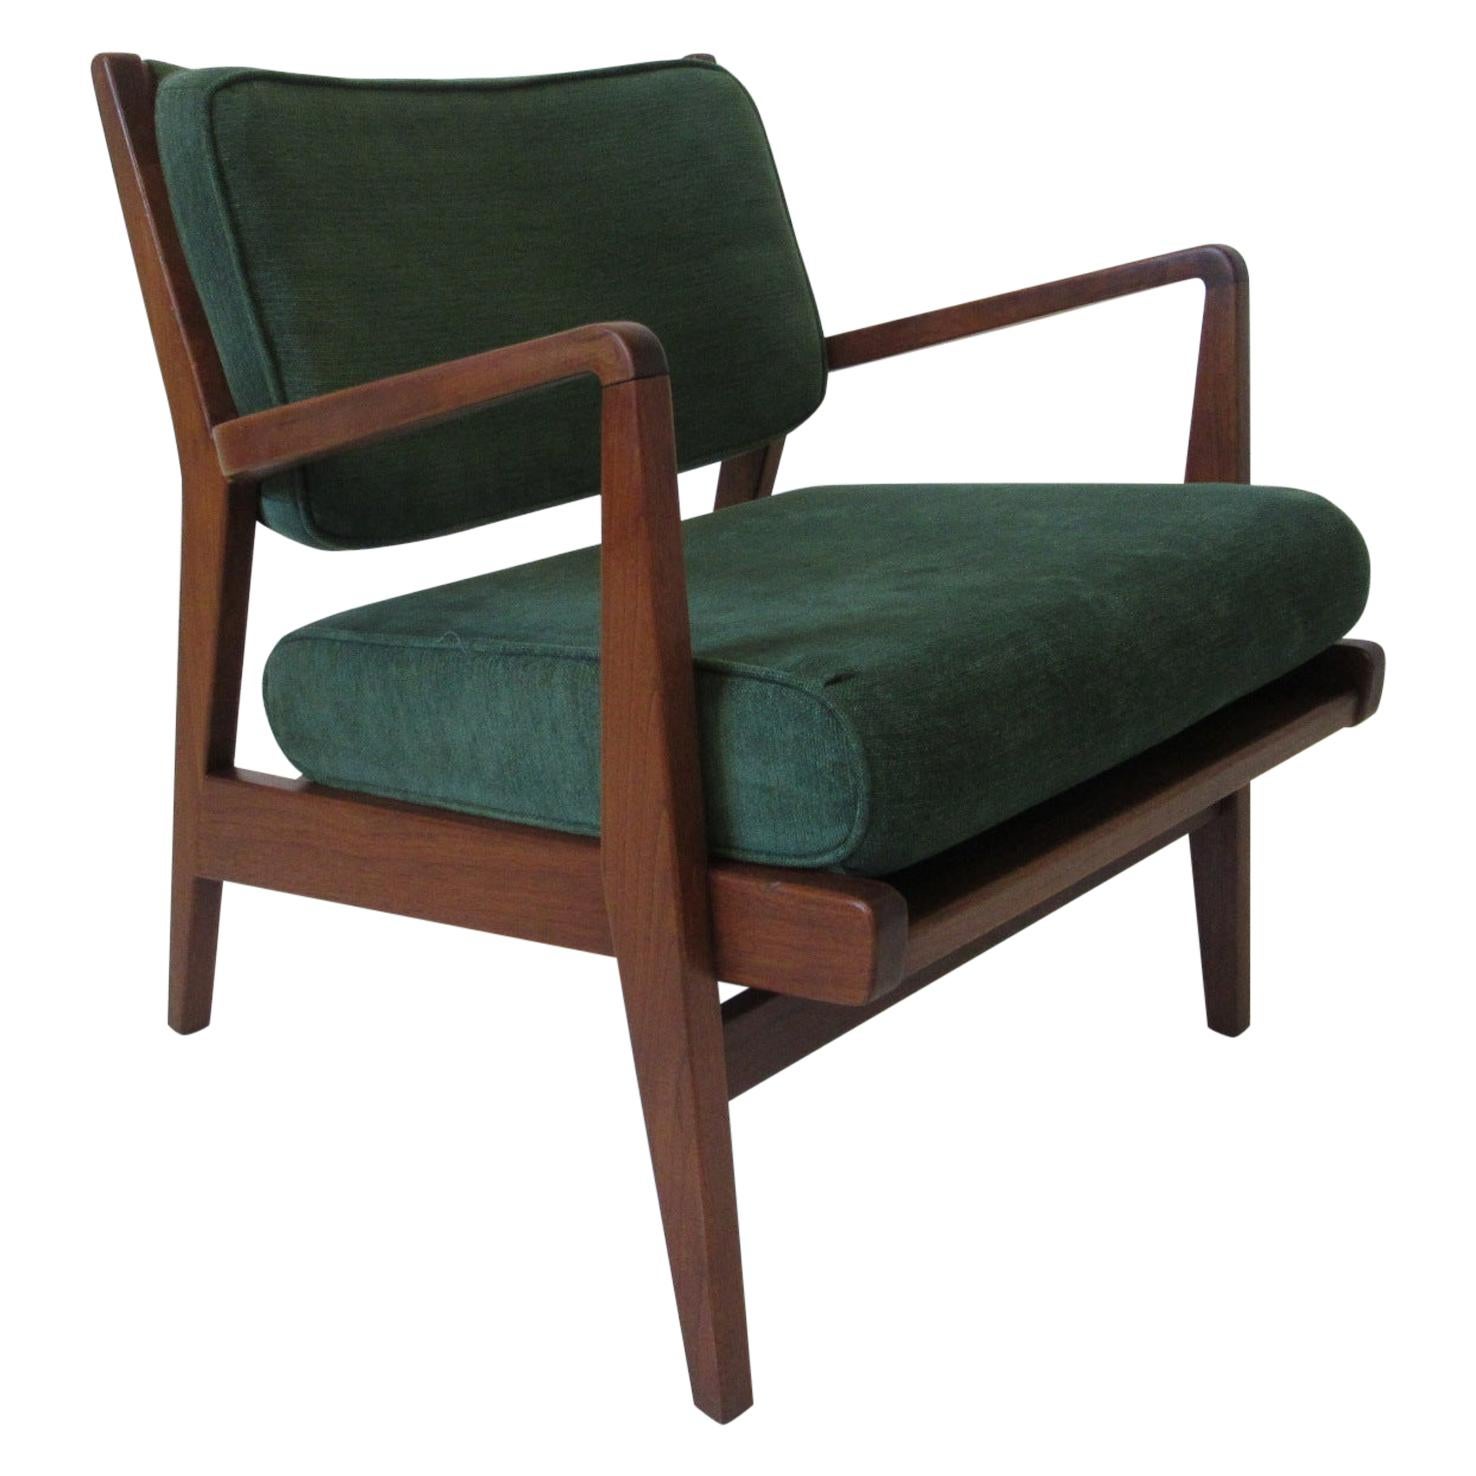 Early 1951 Jens Risom Low Upholstered Walnut Lounge Chair